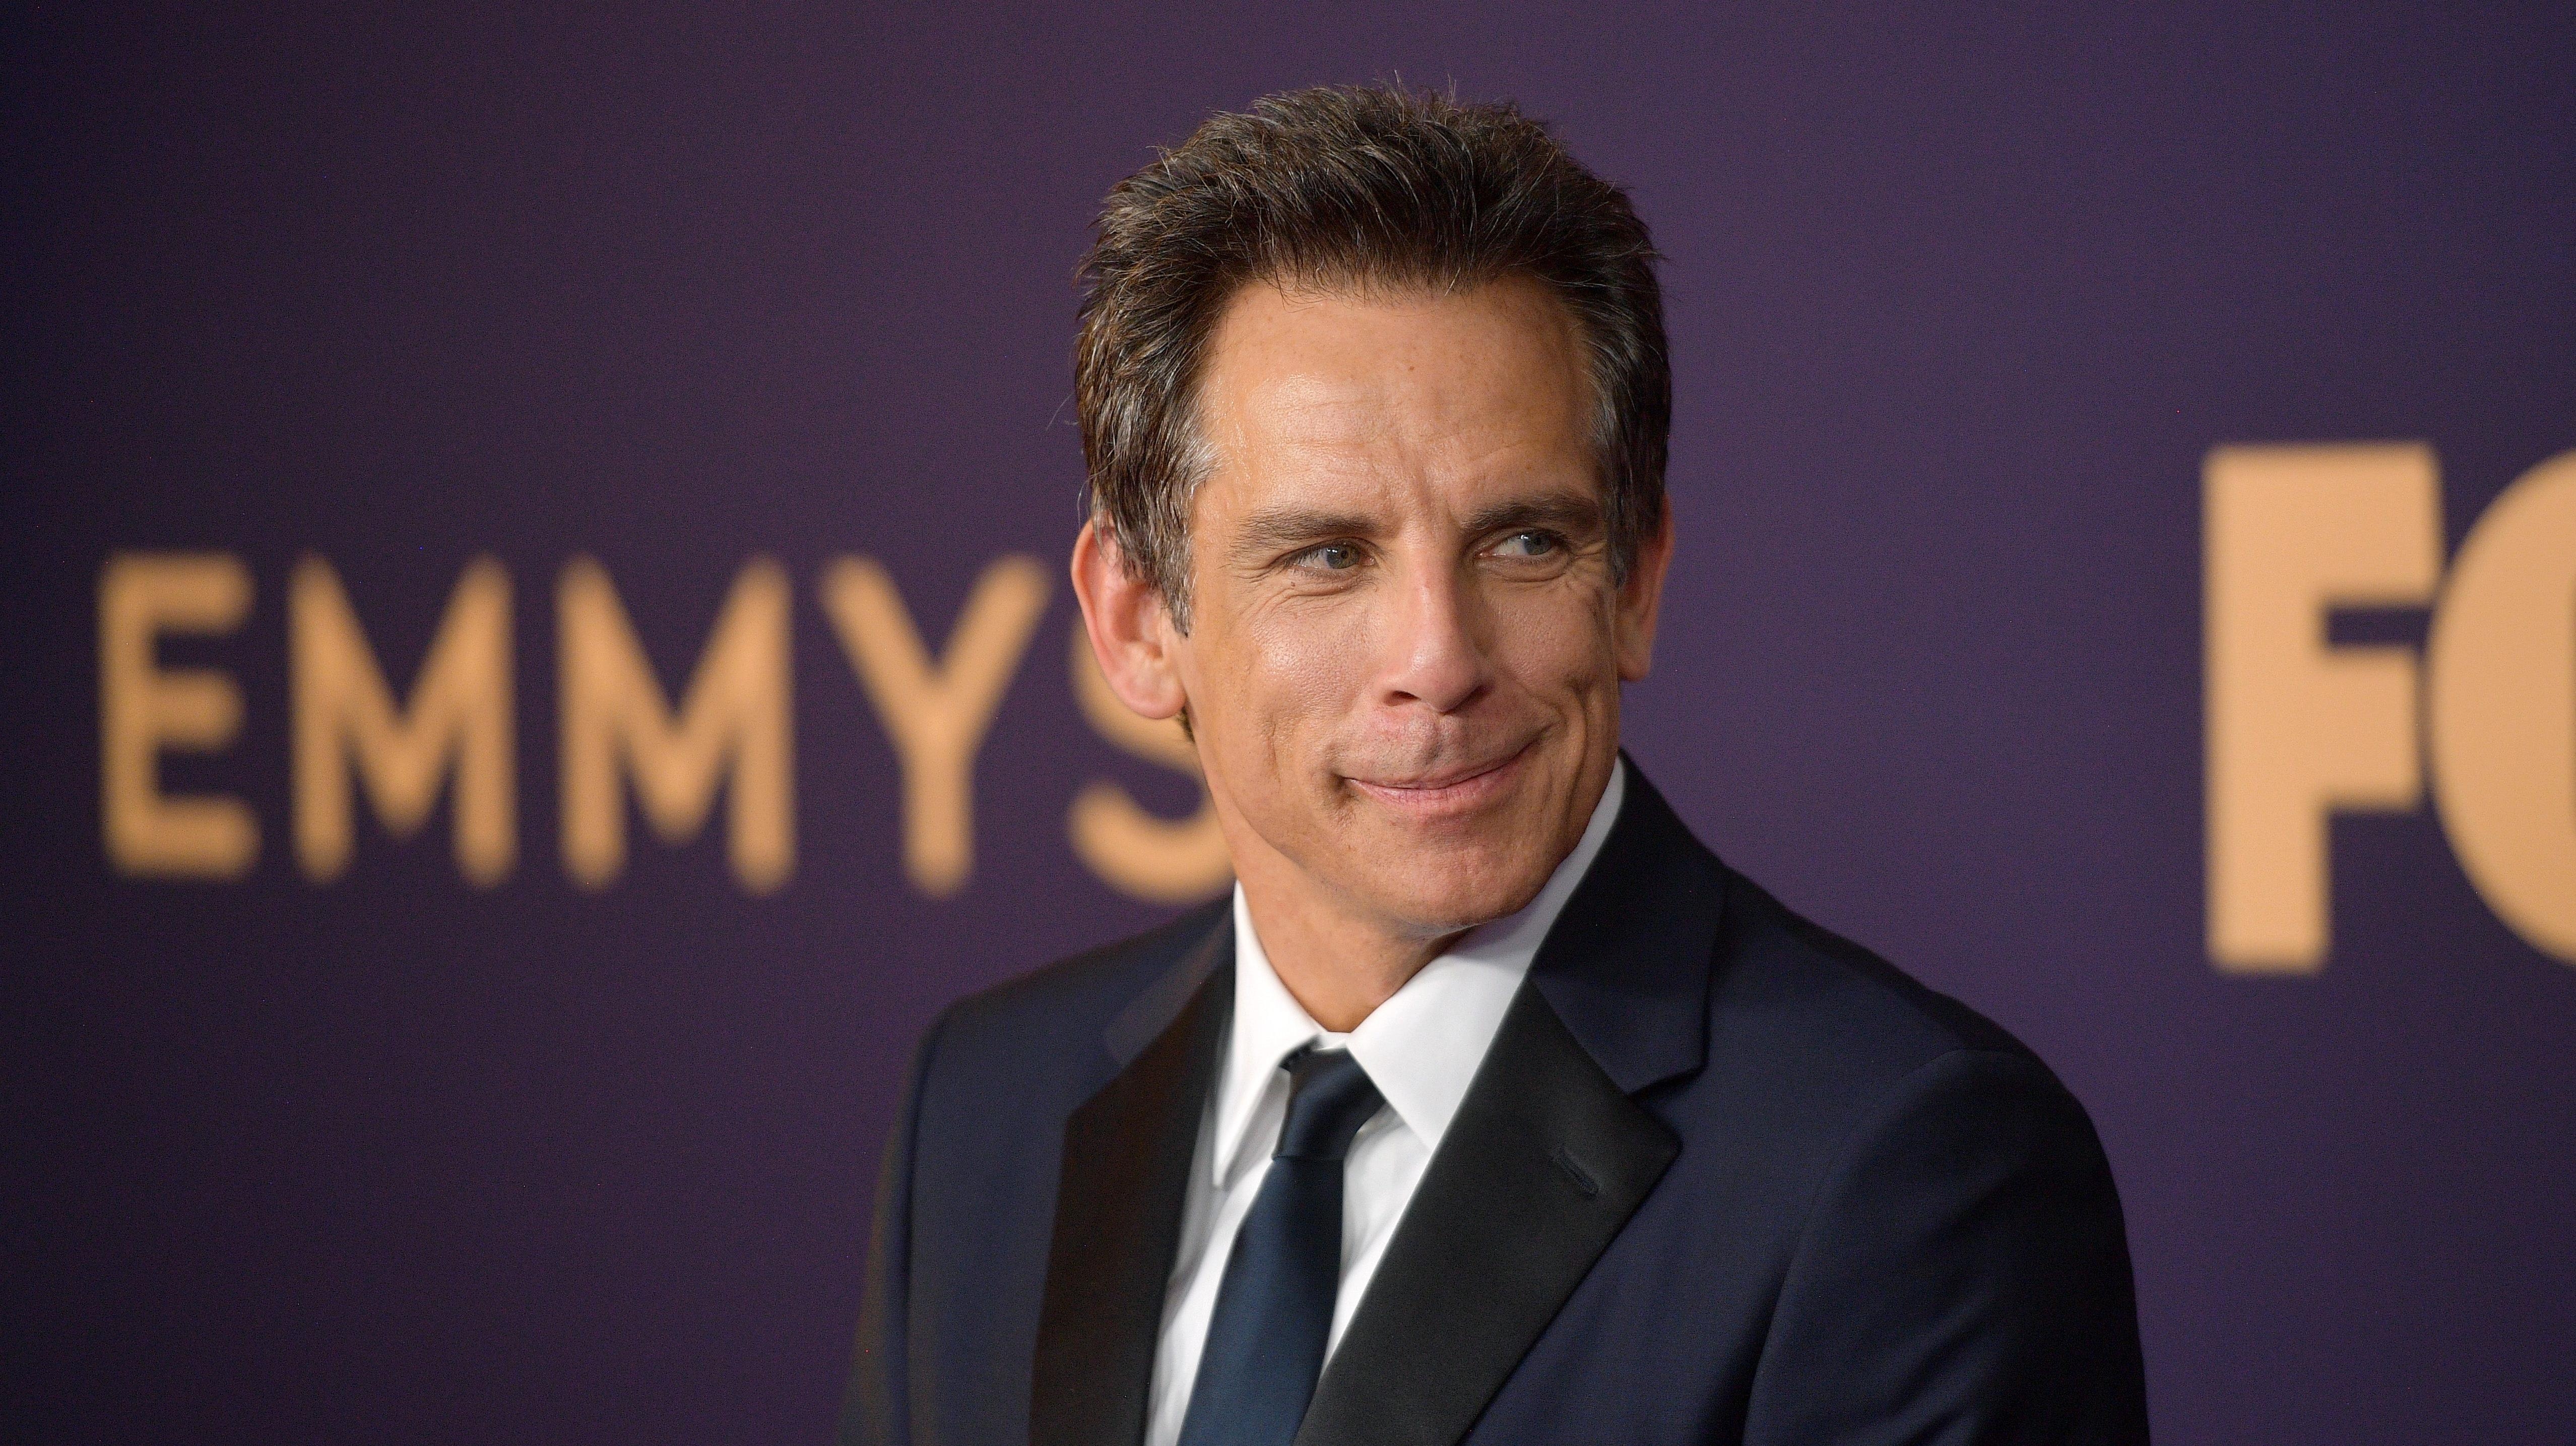 Ben Stiller decides to look on the bright side of Zoolander 2 being a box office flop